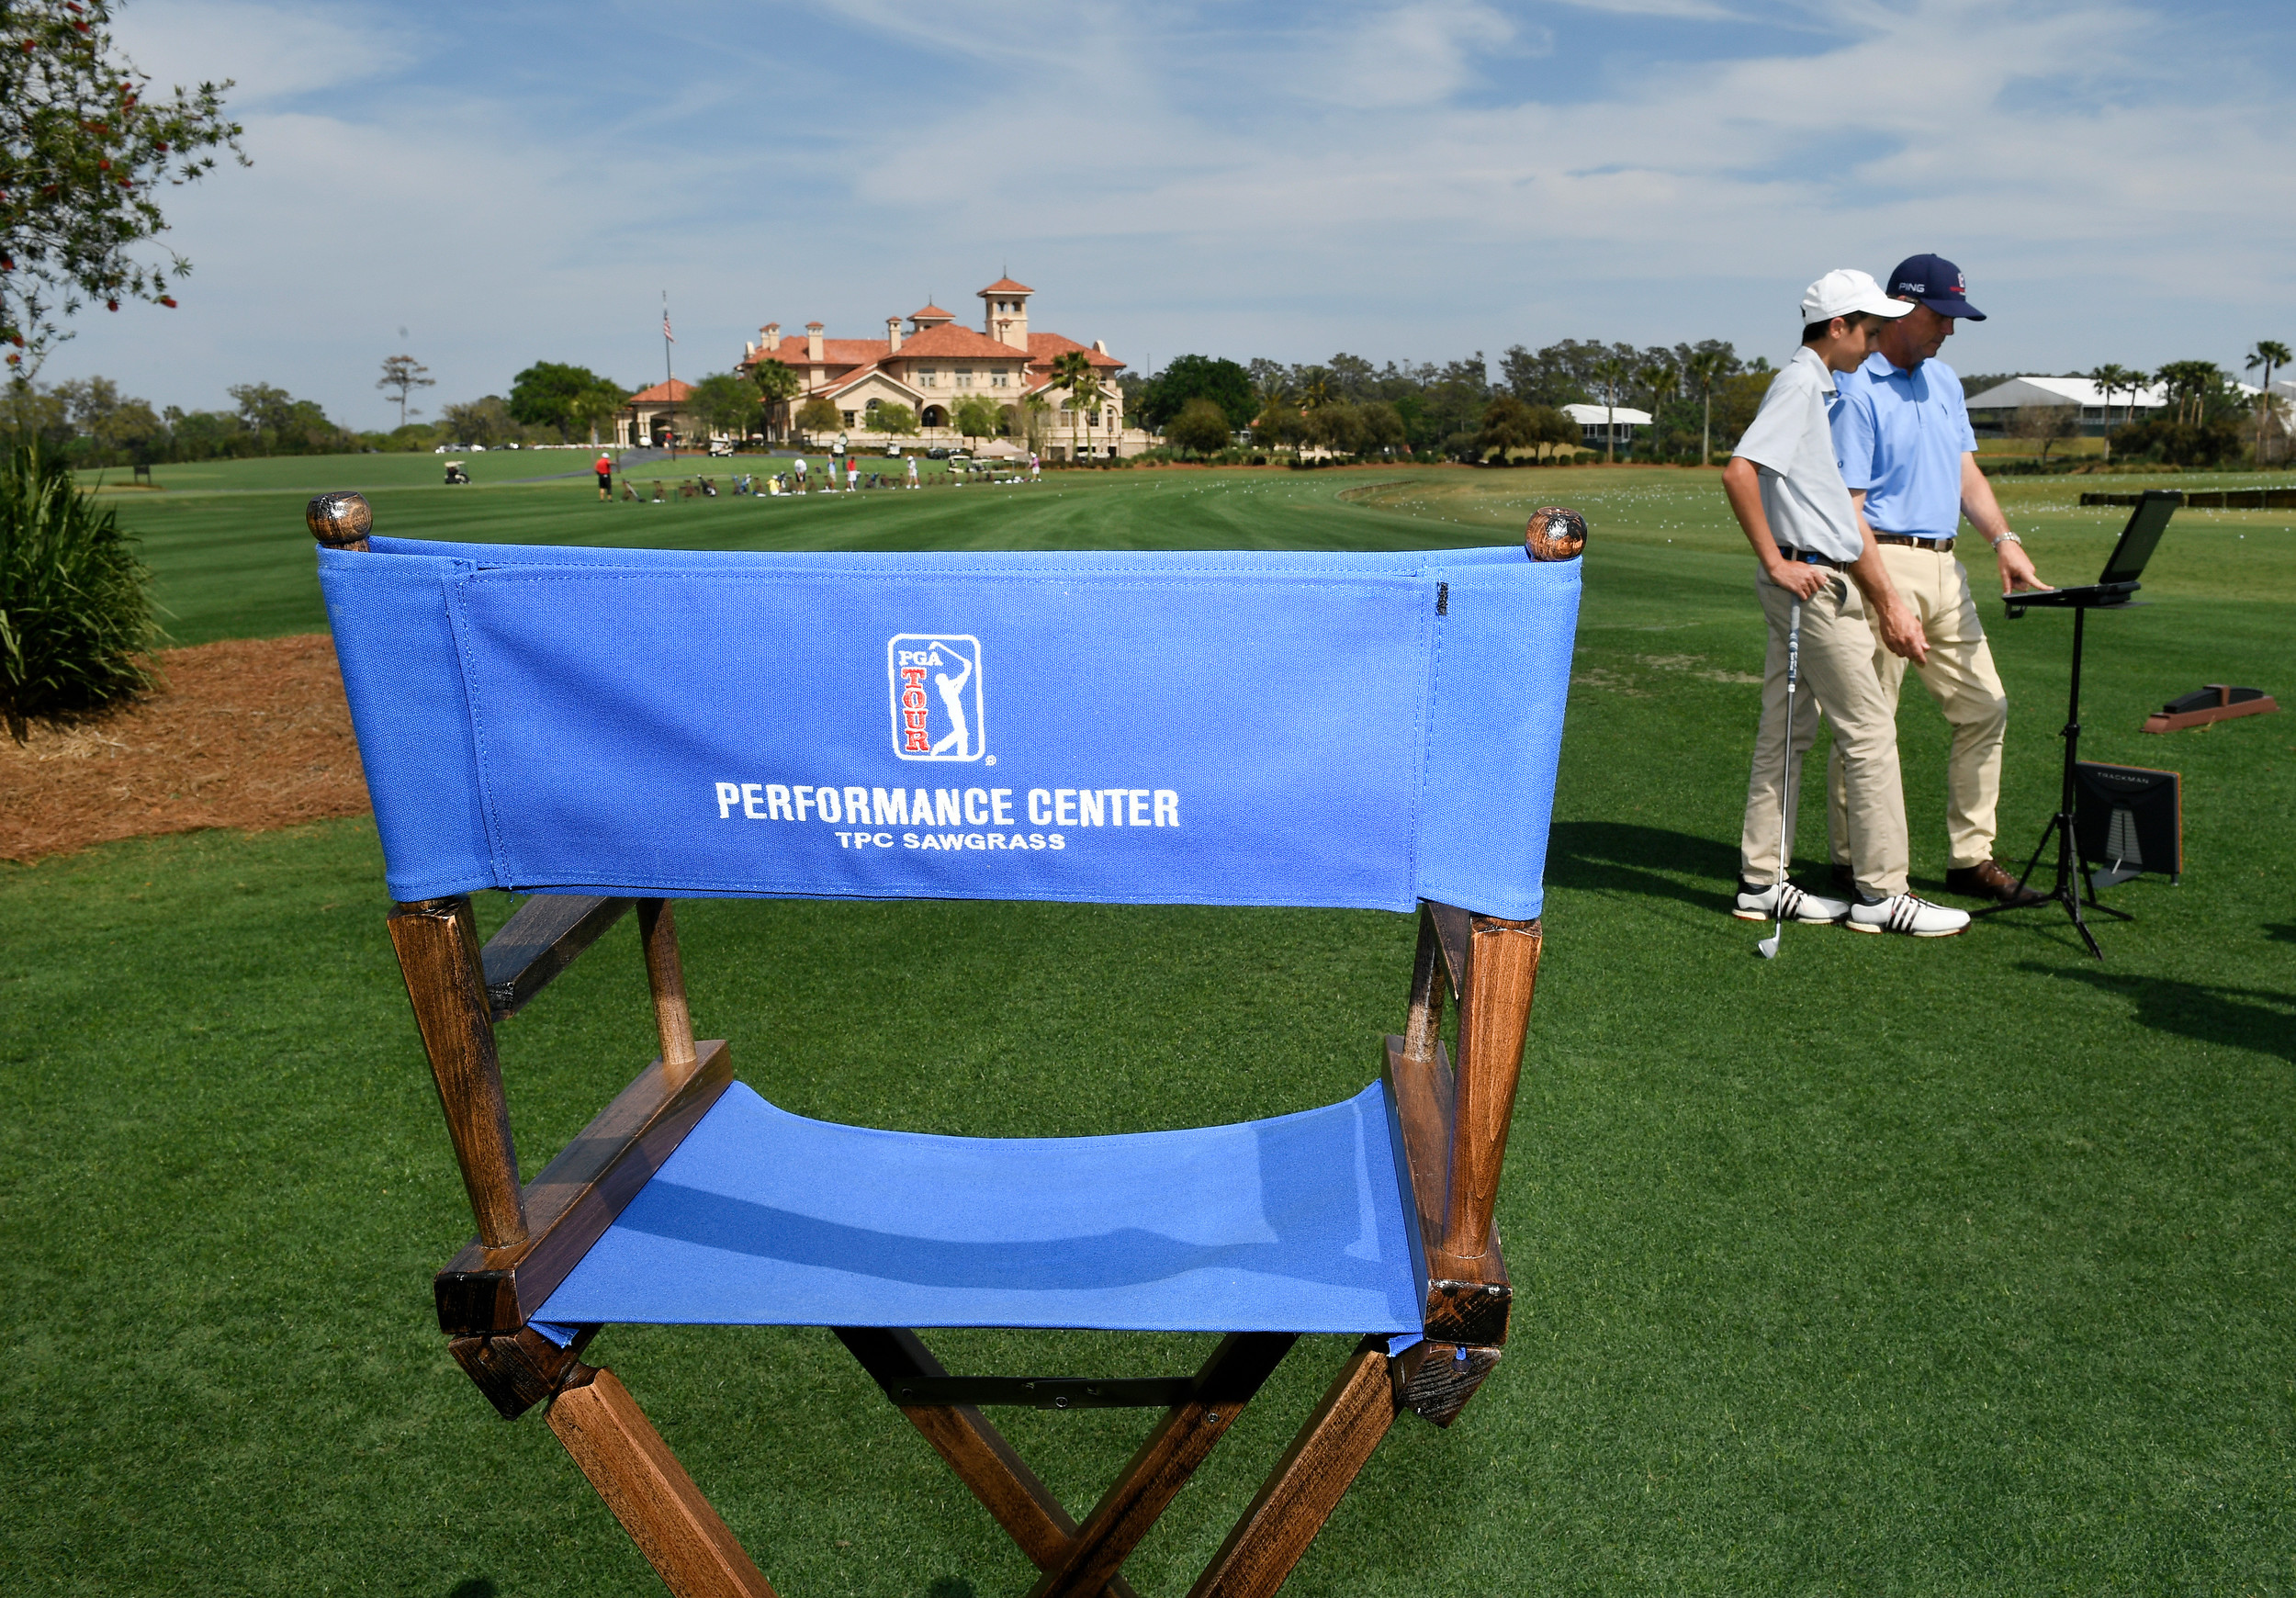 The performance center is available for golfers of varying ages and skill levels.